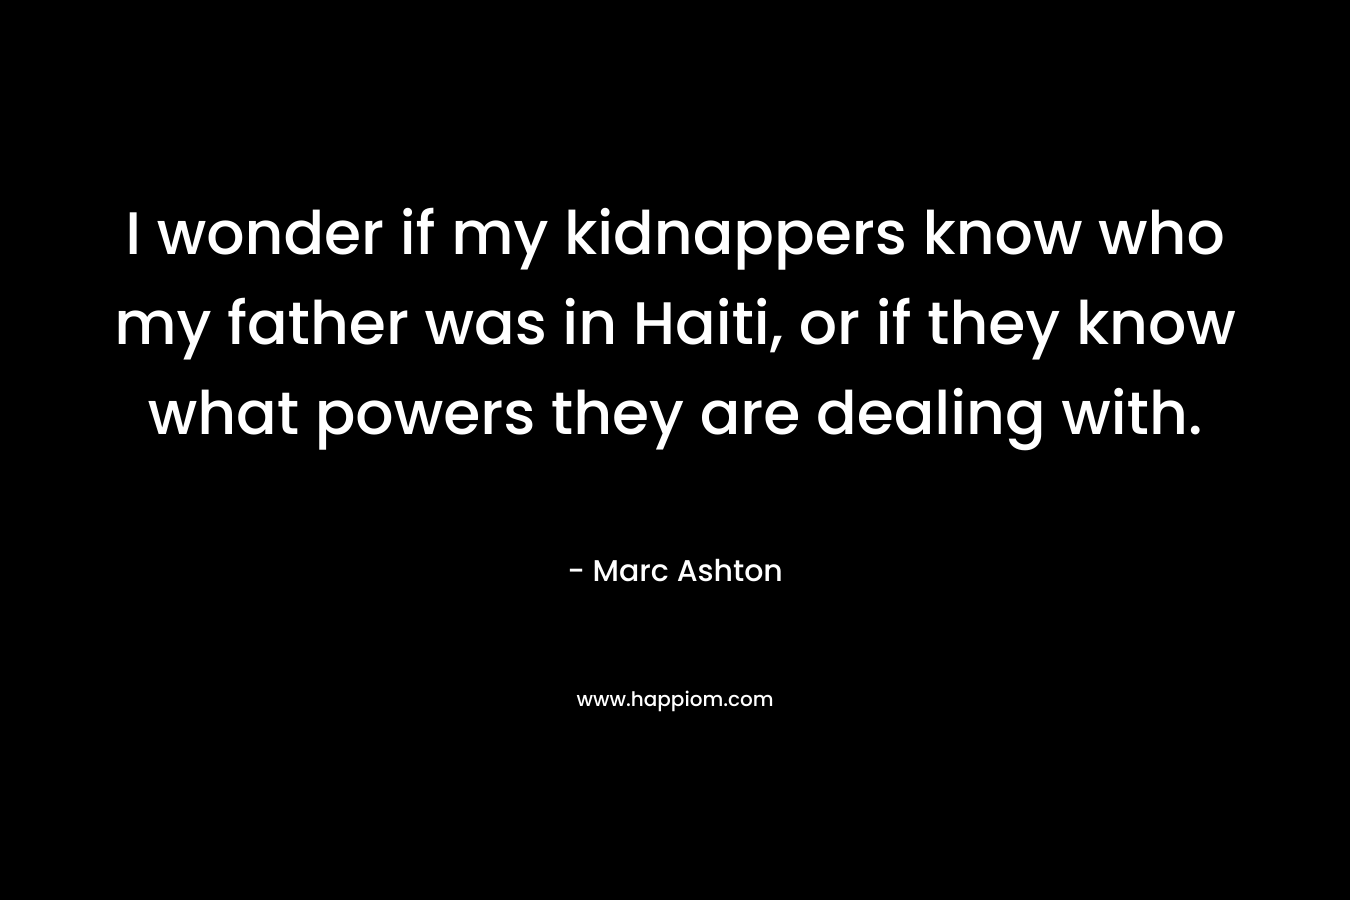 I wonder if my kidnappers know who my father was in Haiti, or if they know what powers they are dealing with.